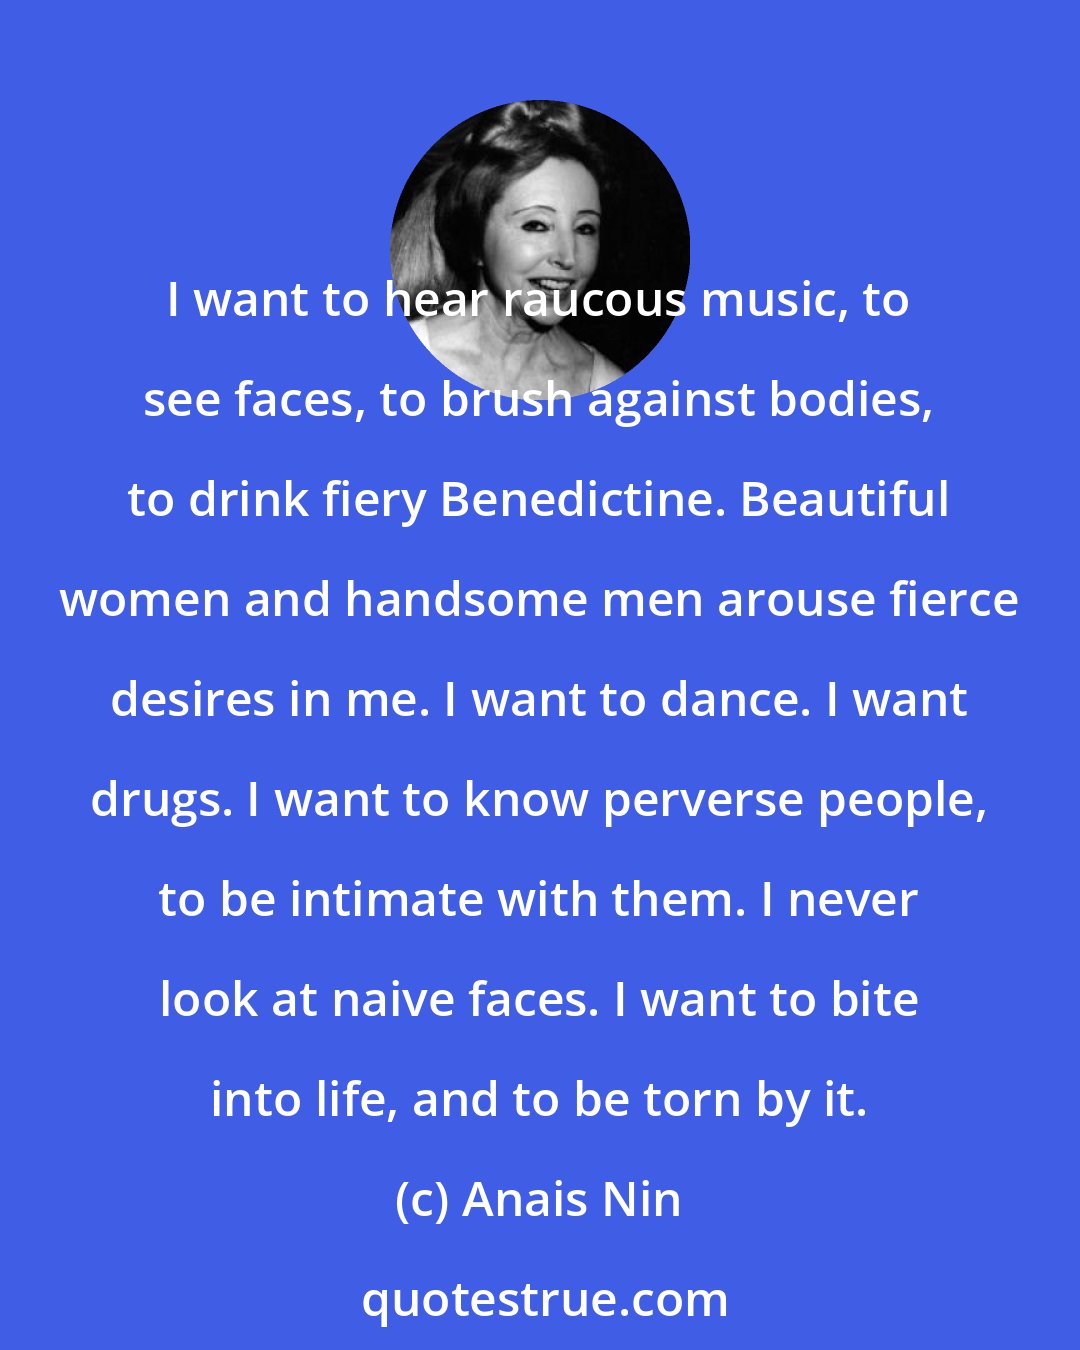 Anais Nin: I want to hear raucous music, to see faces, to brush against bodies, to drink fiery Benedictine. Beautiful women and handsome men arouse fierce desires in me. I want to dance. I want drugs. I want to know perverse people, to be intimate with them. I never look at naive faces. I want to bite into life, and to be torn by it.